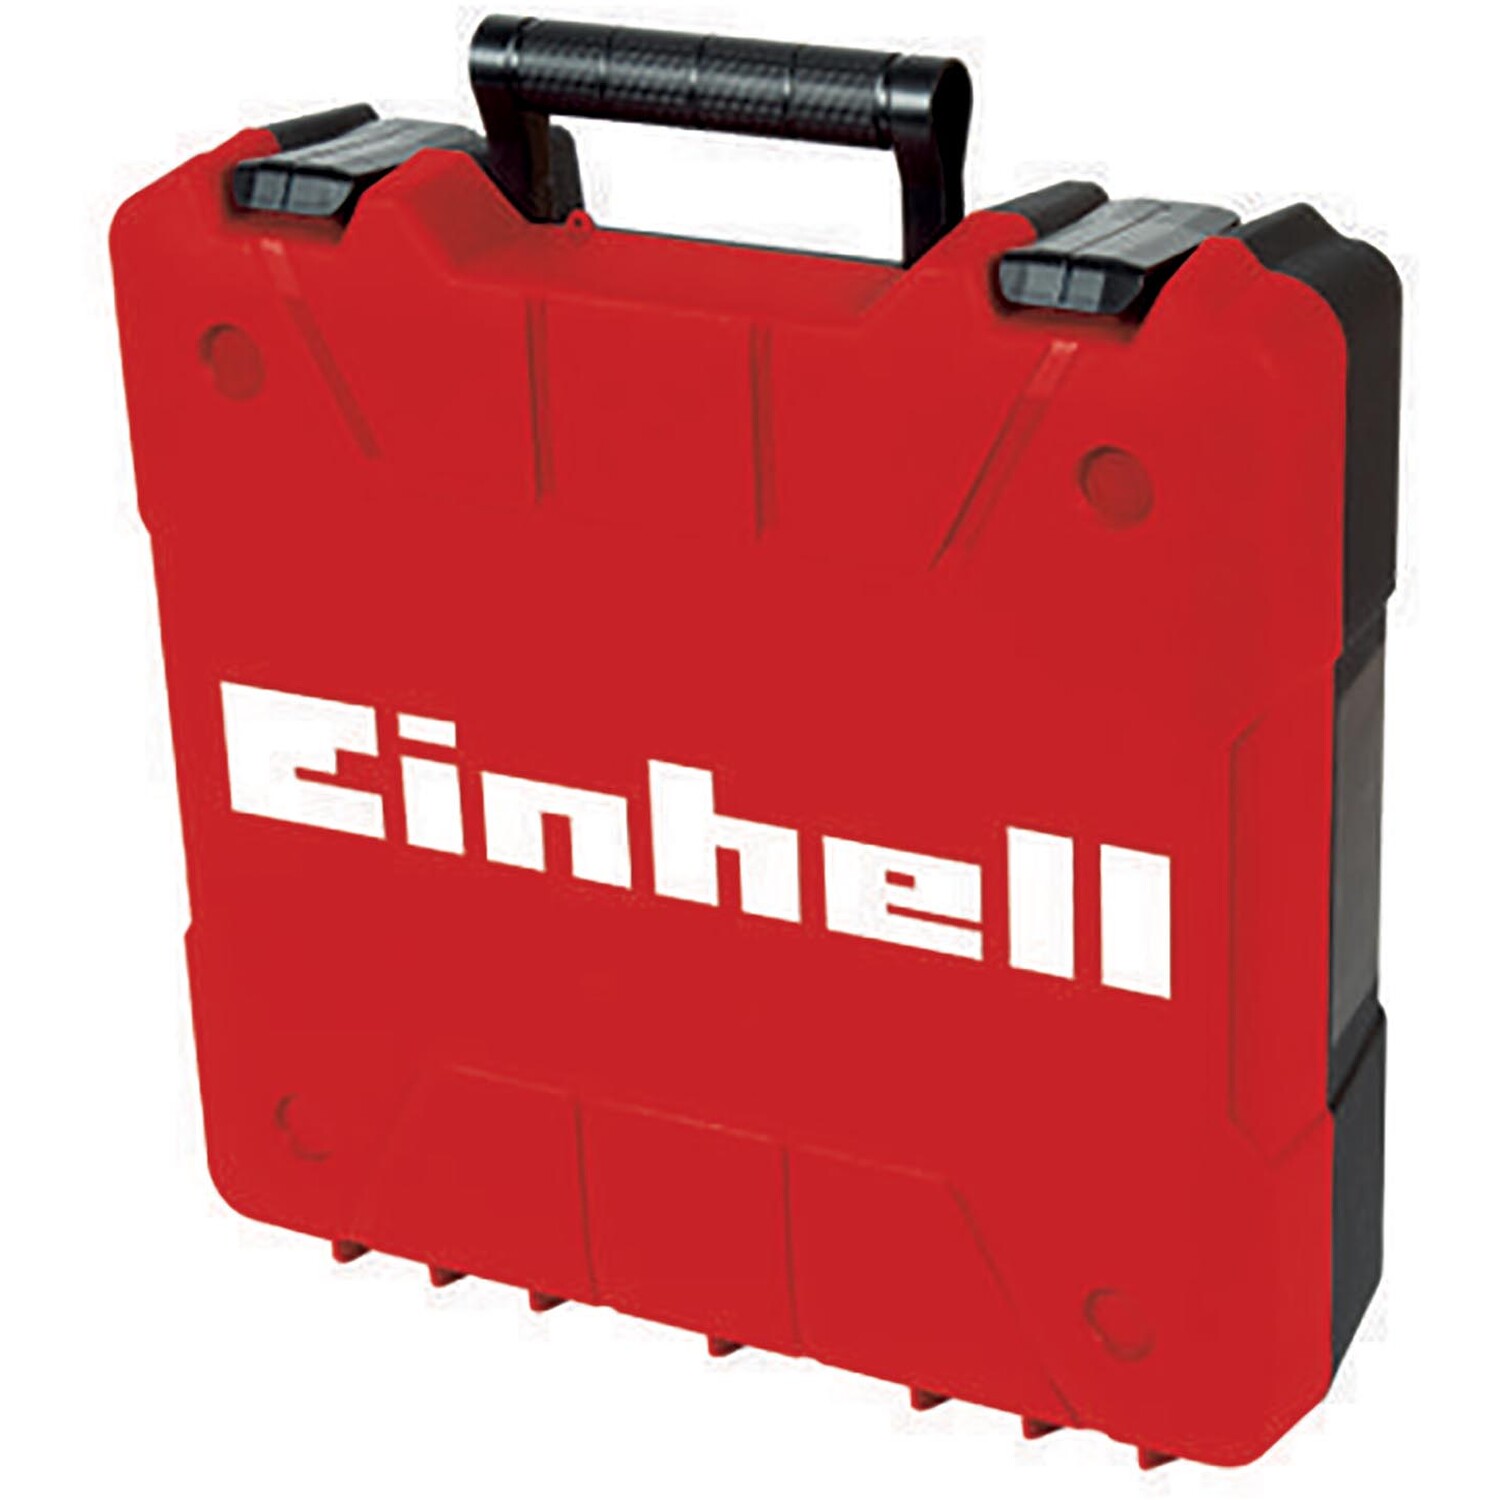 Einhell Impact Drill with Bit Set and Case Image 3